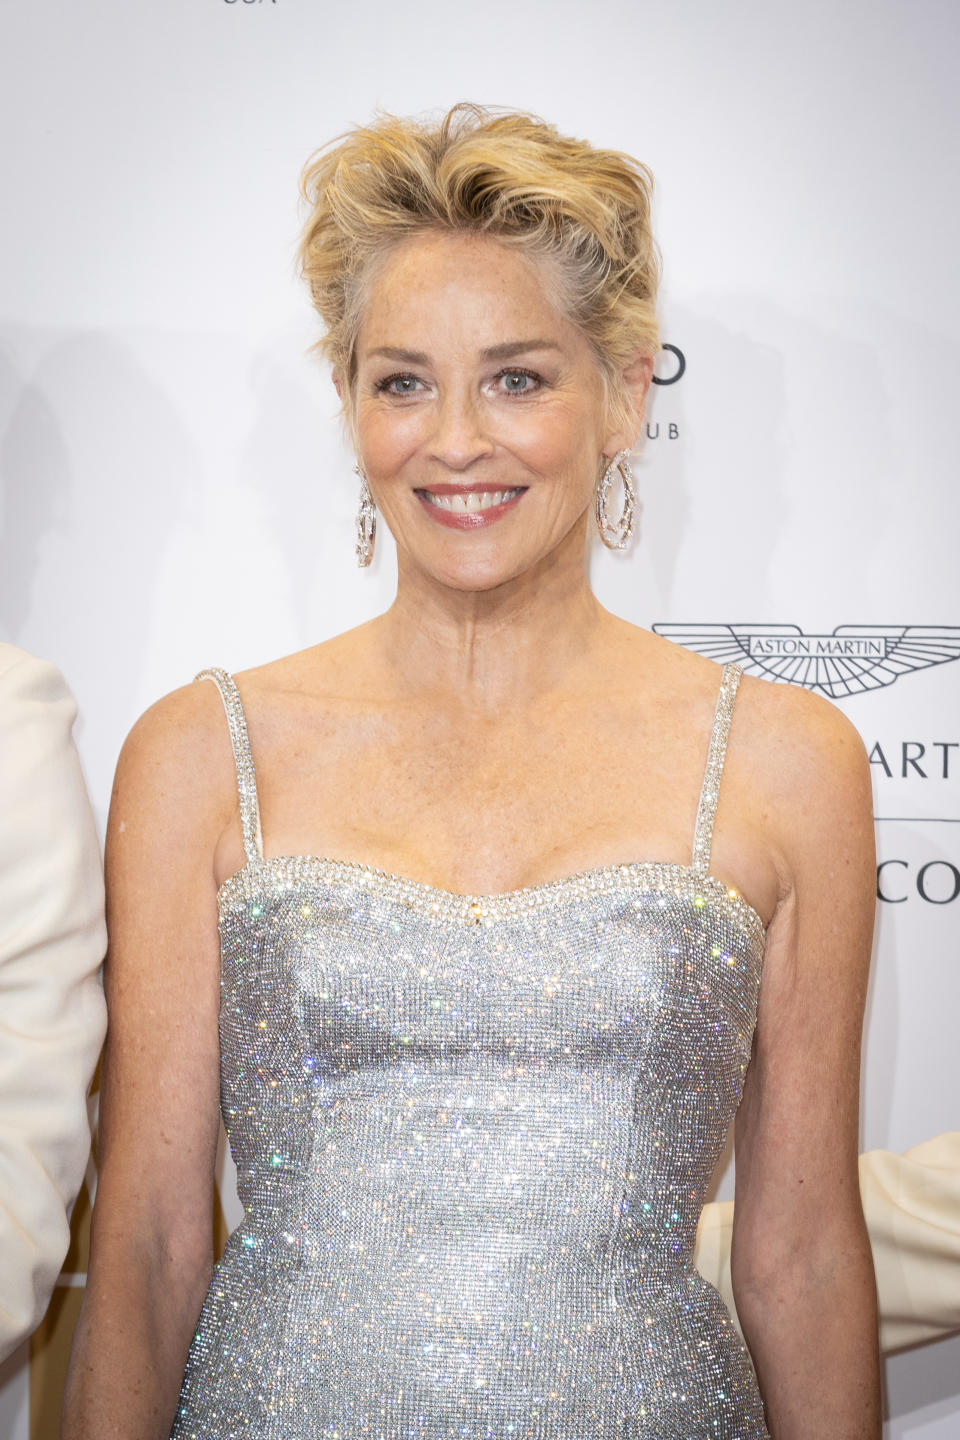 Sharon Stone poses on the red carpet of “No Time to Die” movie premiere. - Credit: SplashNews.com